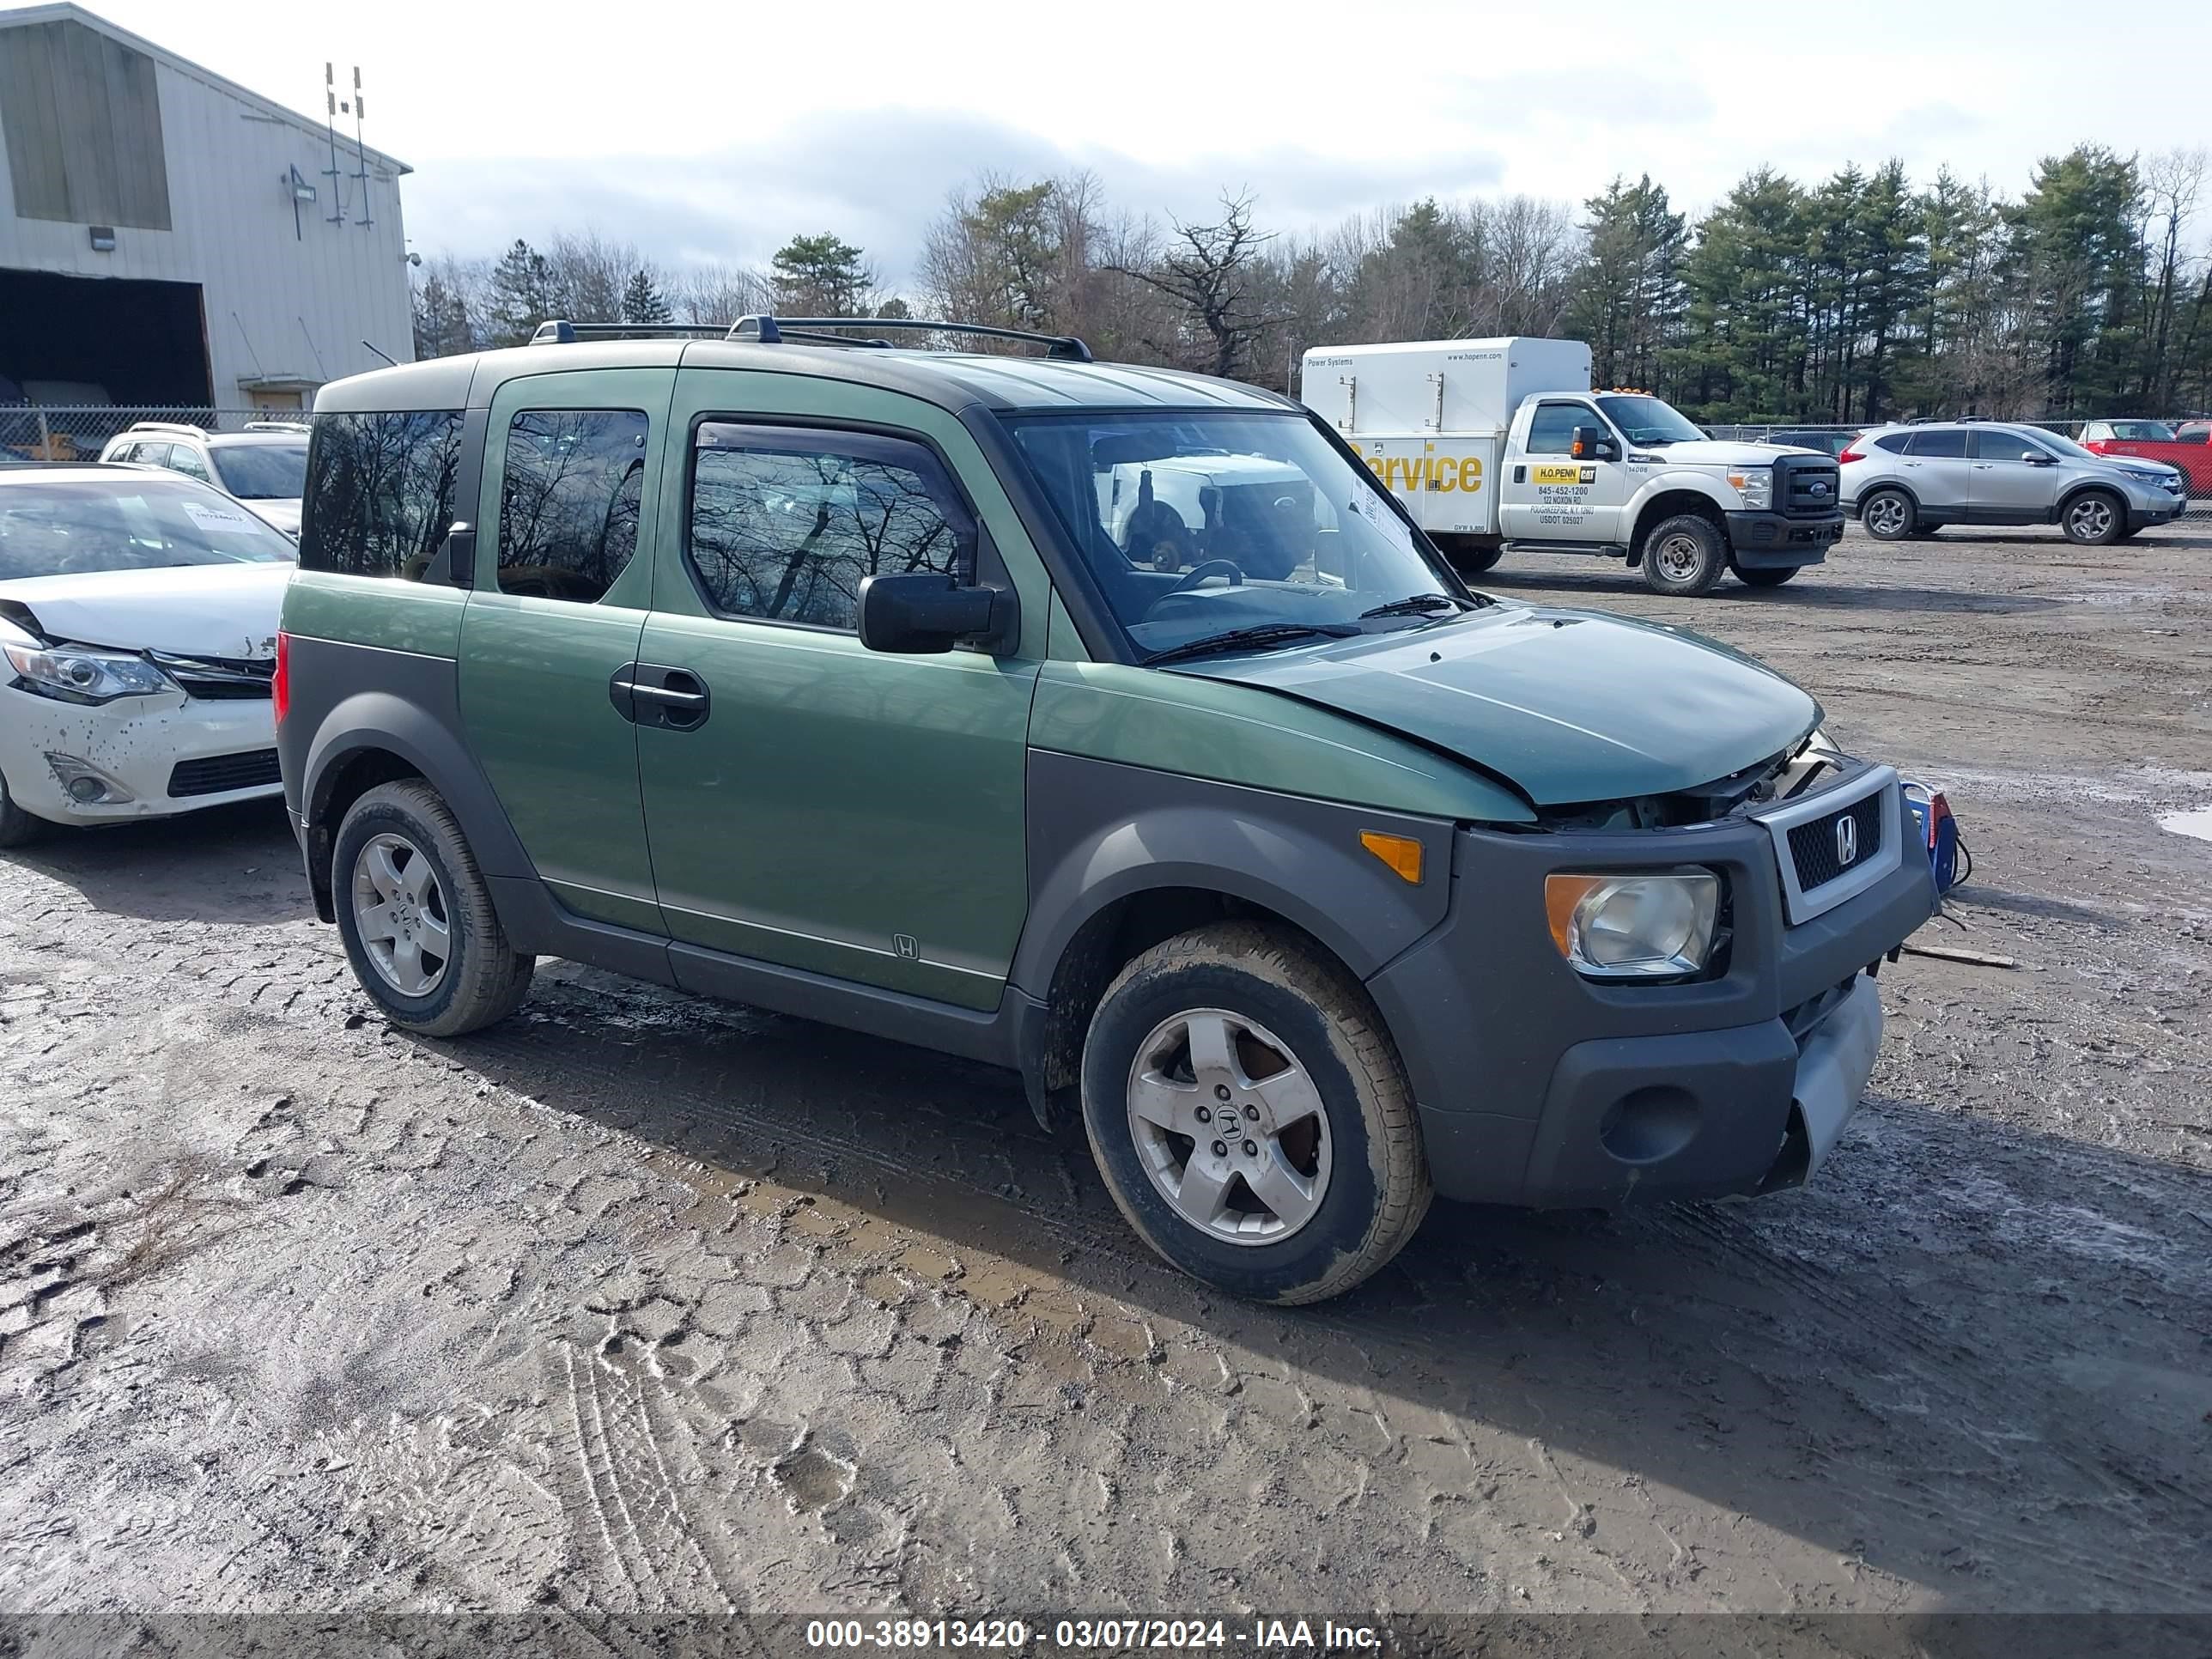 vin: 5J6YH28544L018698 5J6YH28544L018698 2004 honda element 2400 for Sale in 12303, 1210 Kings Road, Schenectady, New York, USA